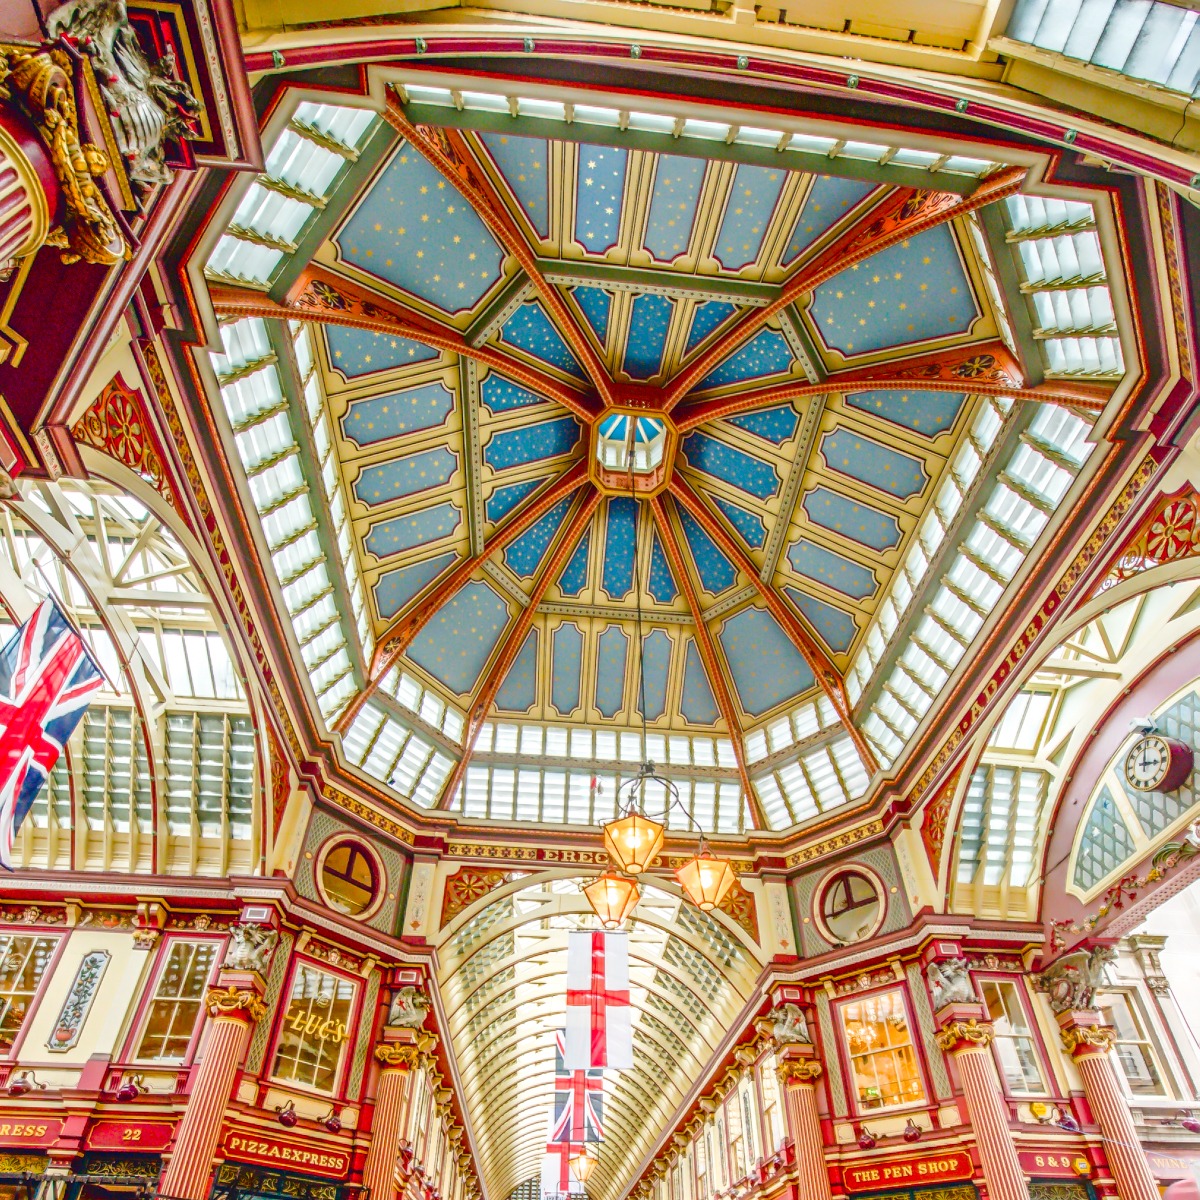 This is the ceiling of the main hall at Leadenhall Market in the City of London. The ornate roof structure, painted green, maroon and cream, and cobbled floors of the current structure were designed in 1881 by Sir Horace Jones.